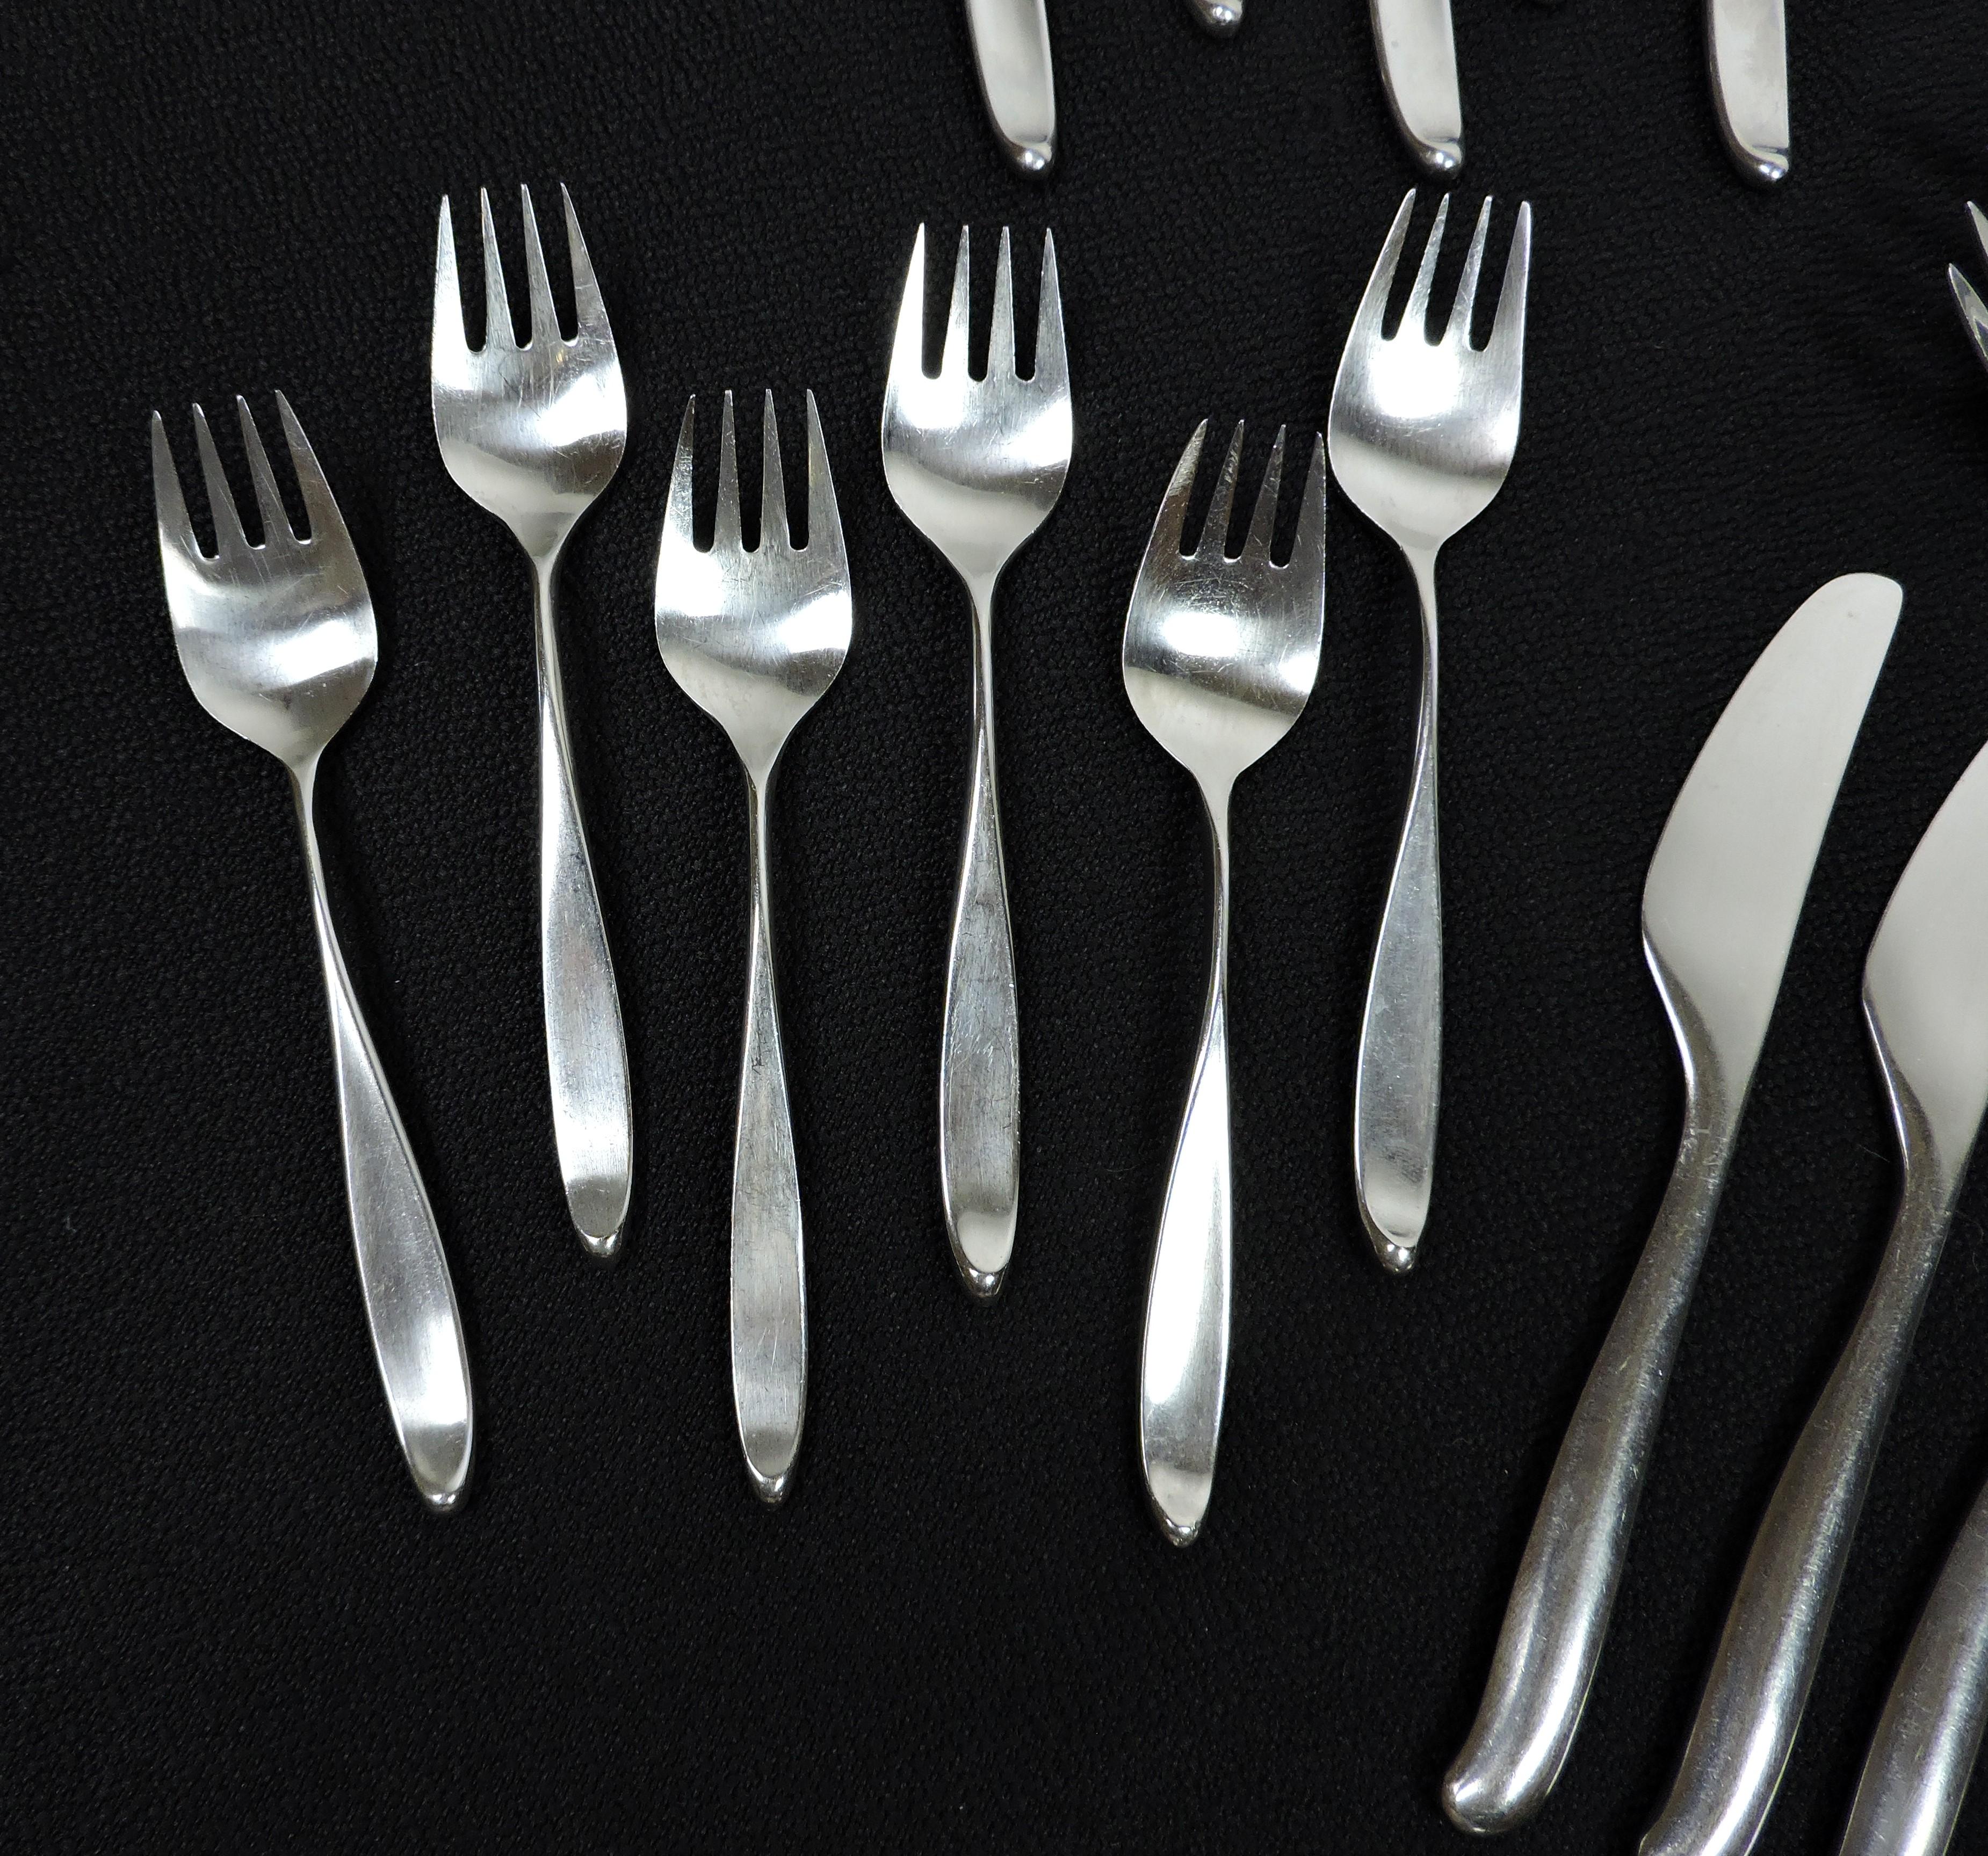 Beautiful 38 piece, service for six, stainless steel flatware set in the Design 2 pattern manufactured by Lauffer. Originally designed in 1956 by the American industrial designer Don Wallance, it has a timeless look that will never go out of style.